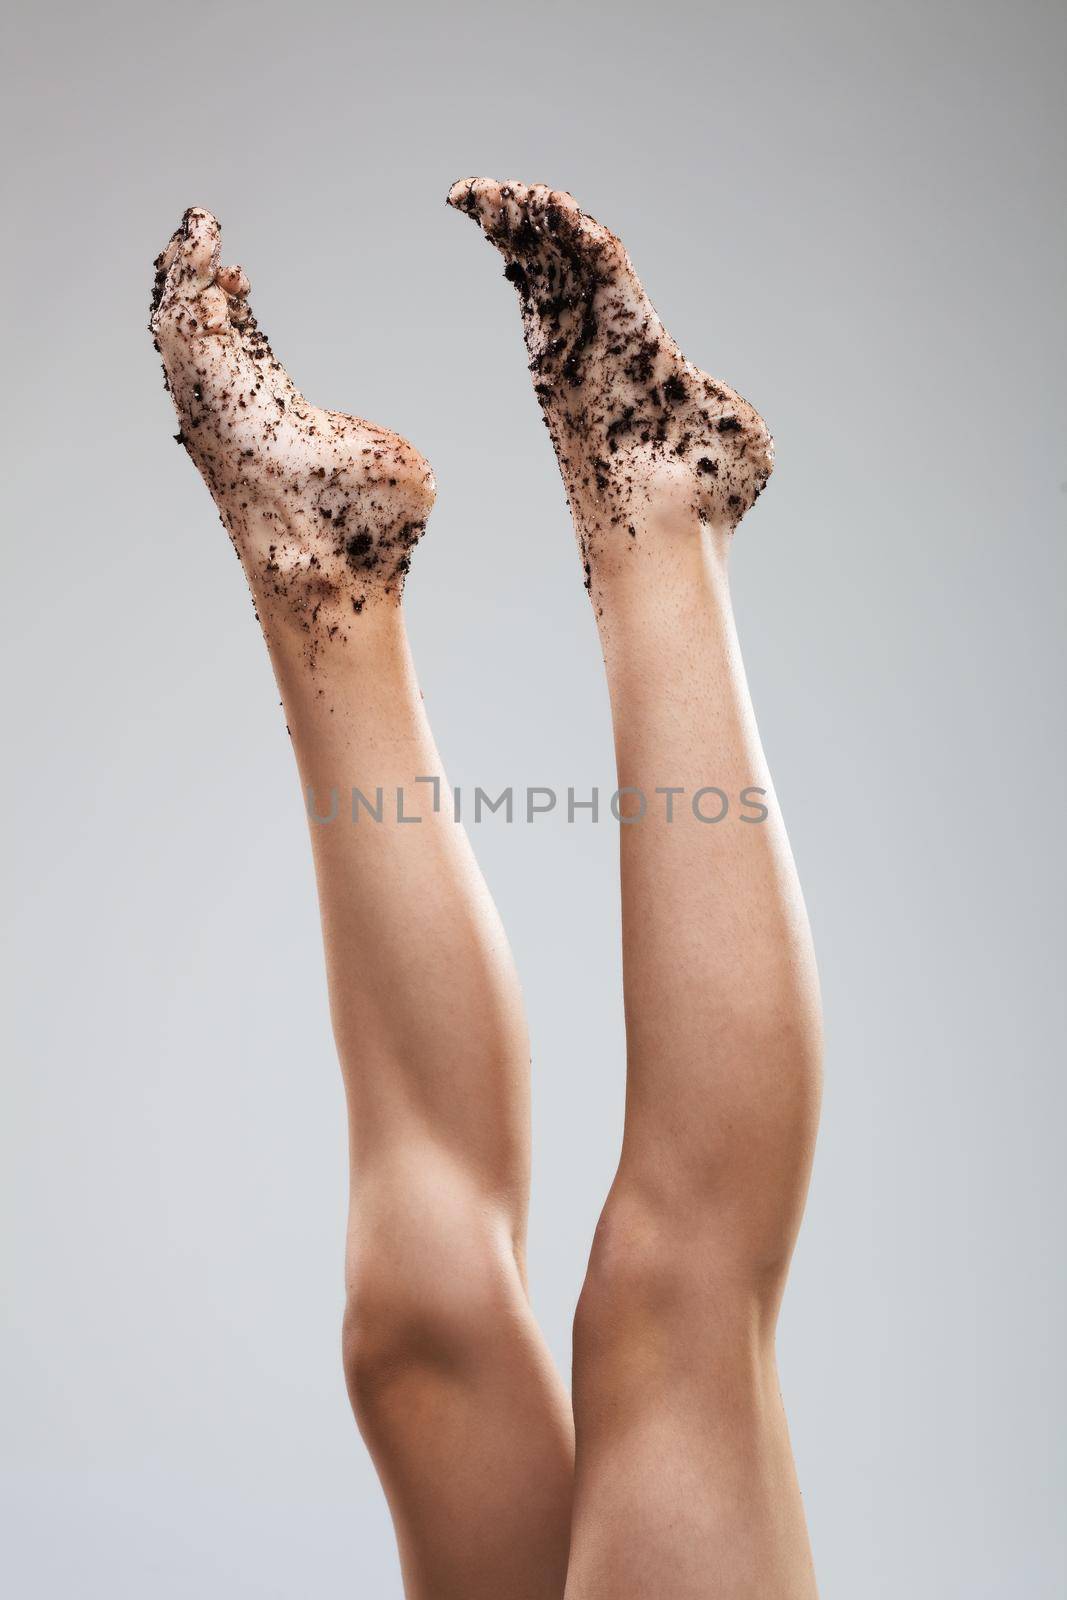 Sexy female legs. Feet covered with dirt.